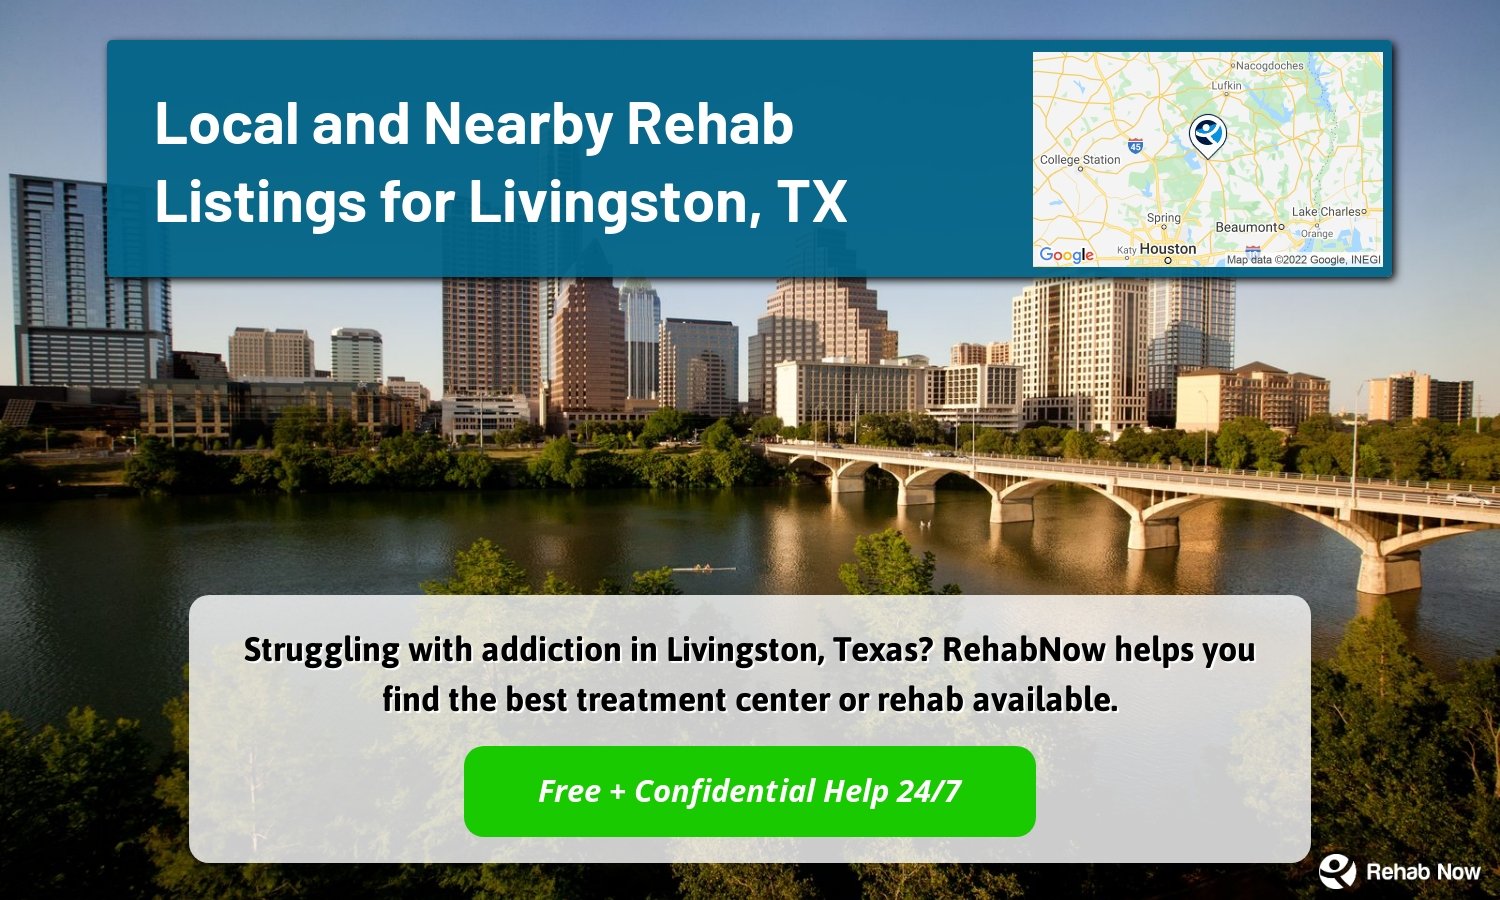 Struggling with addiction in Livingston, Texas? RehabNow helps you find the best treatment center or rehab available.